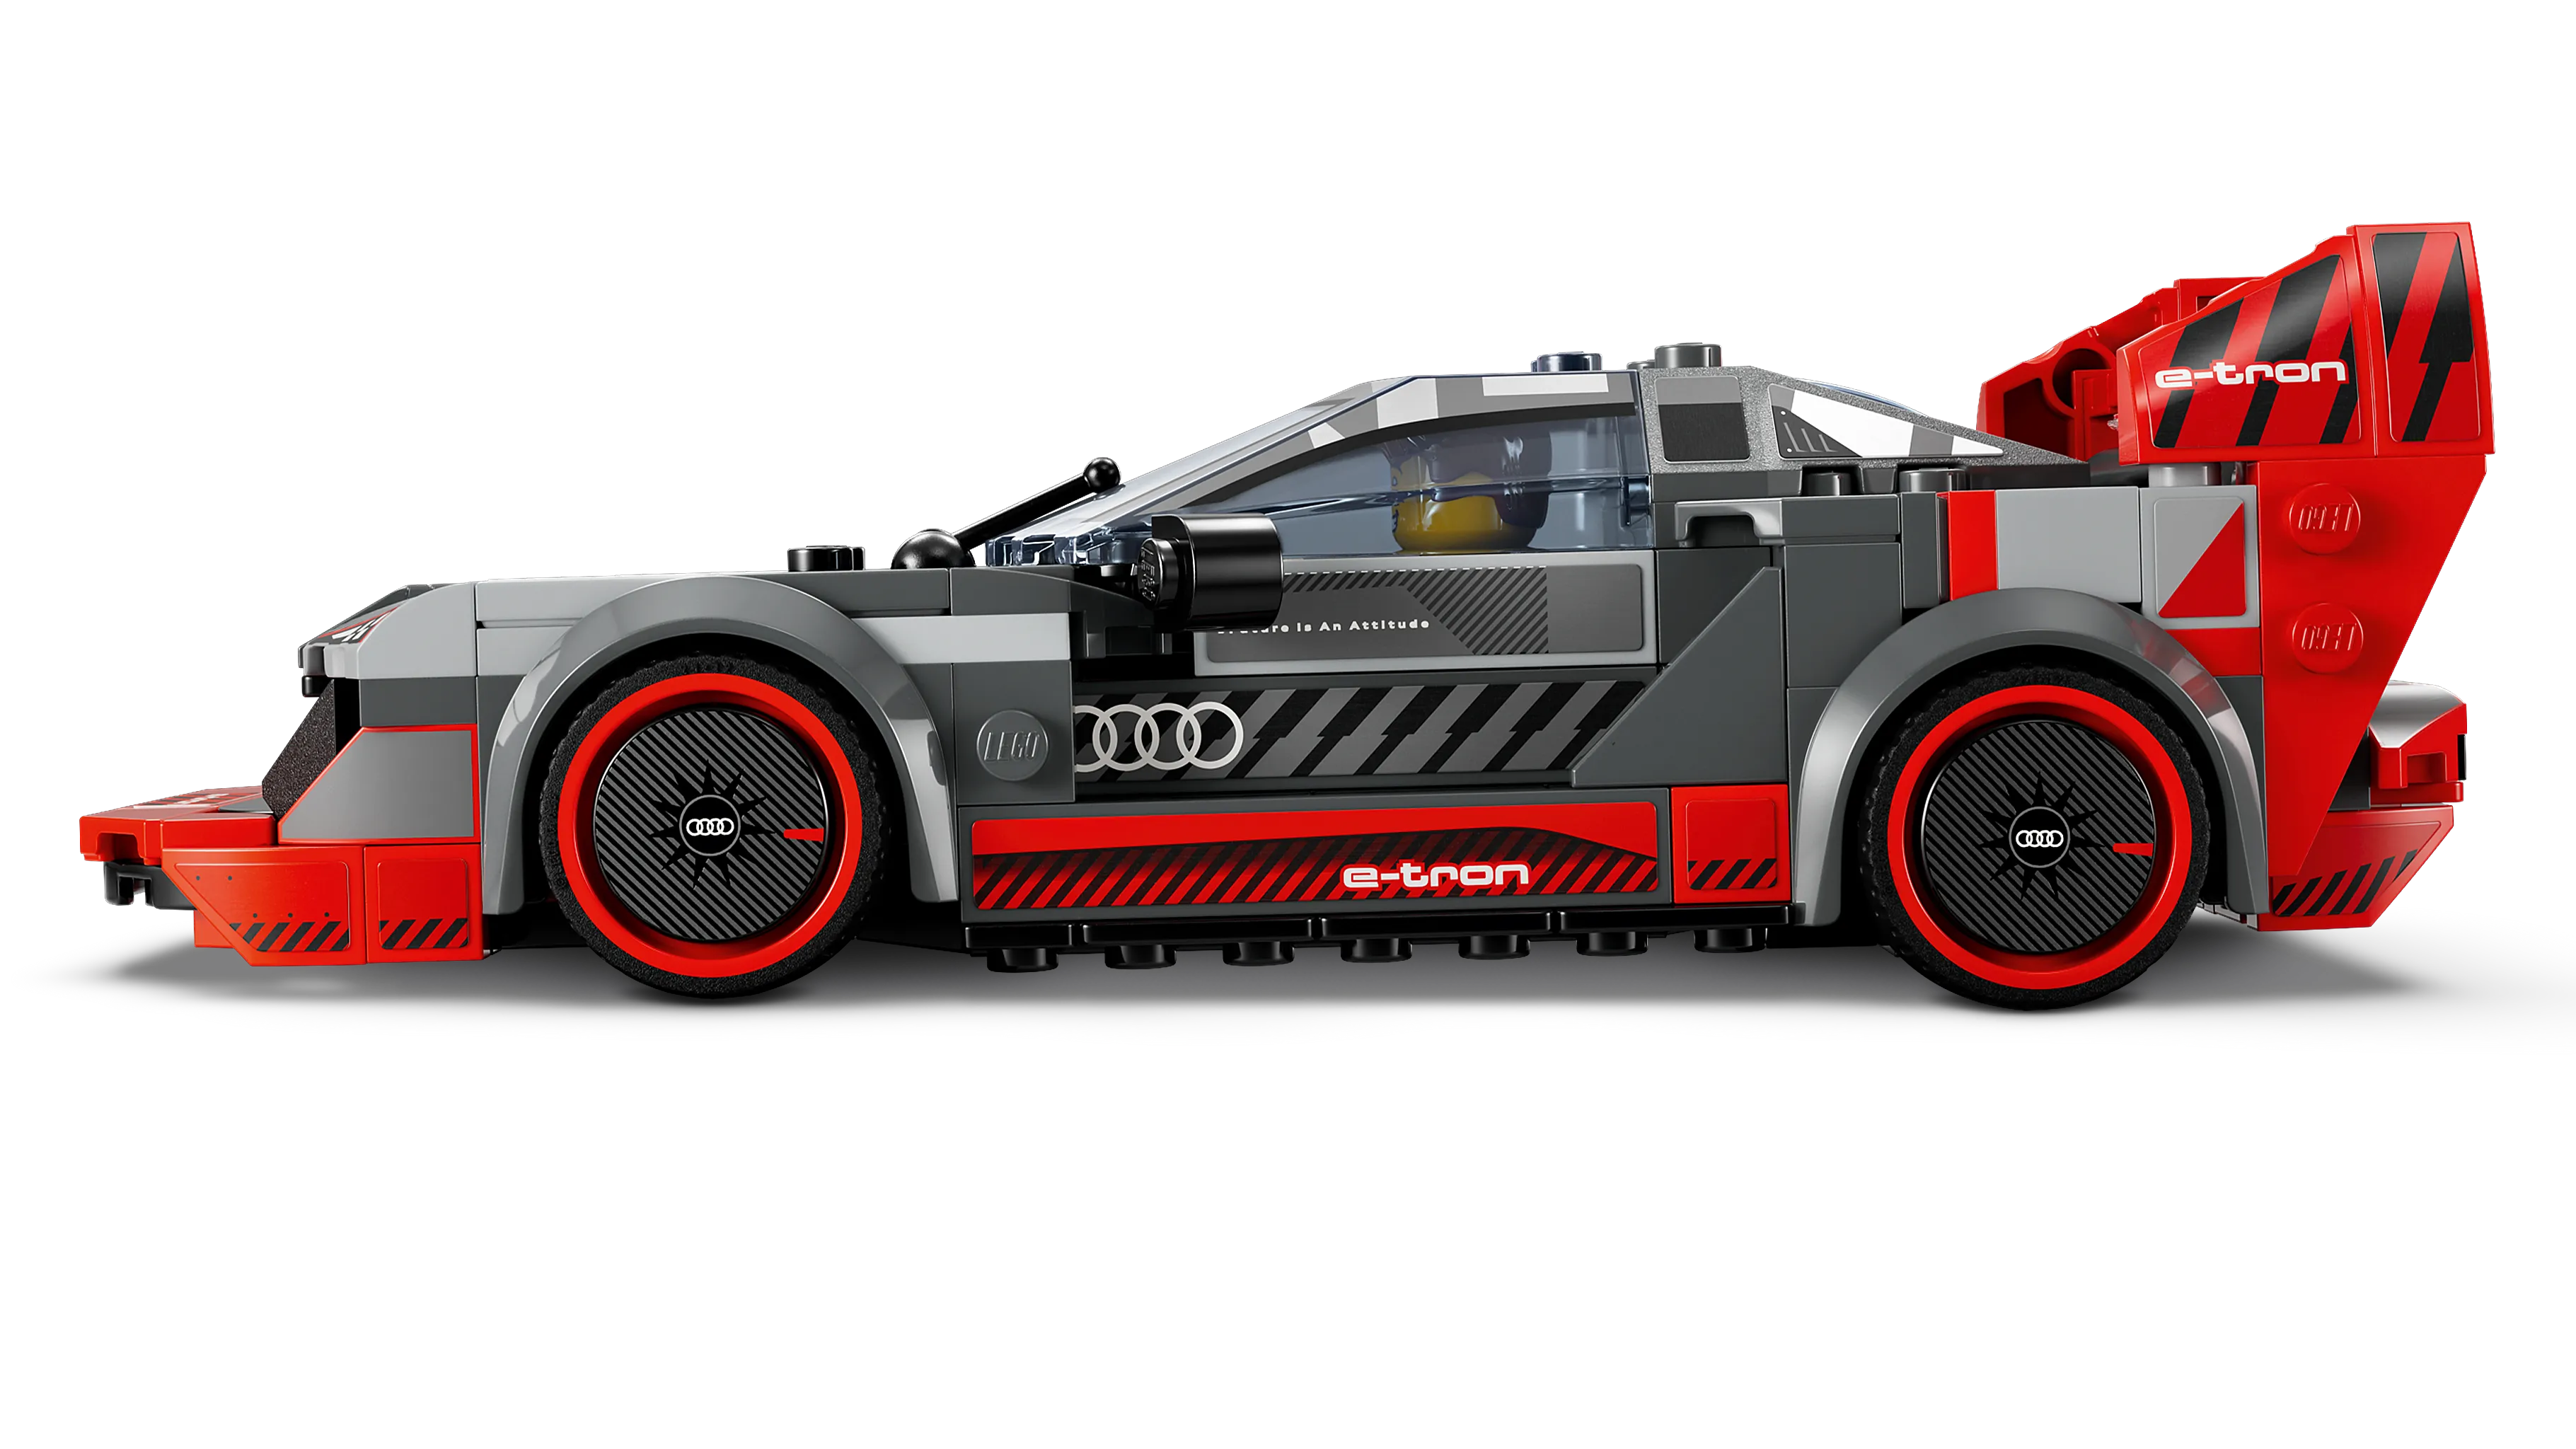 Lego Speed Champions Audi S1 e-tron quattro REVIEW 76921 - March 1st  Release! 